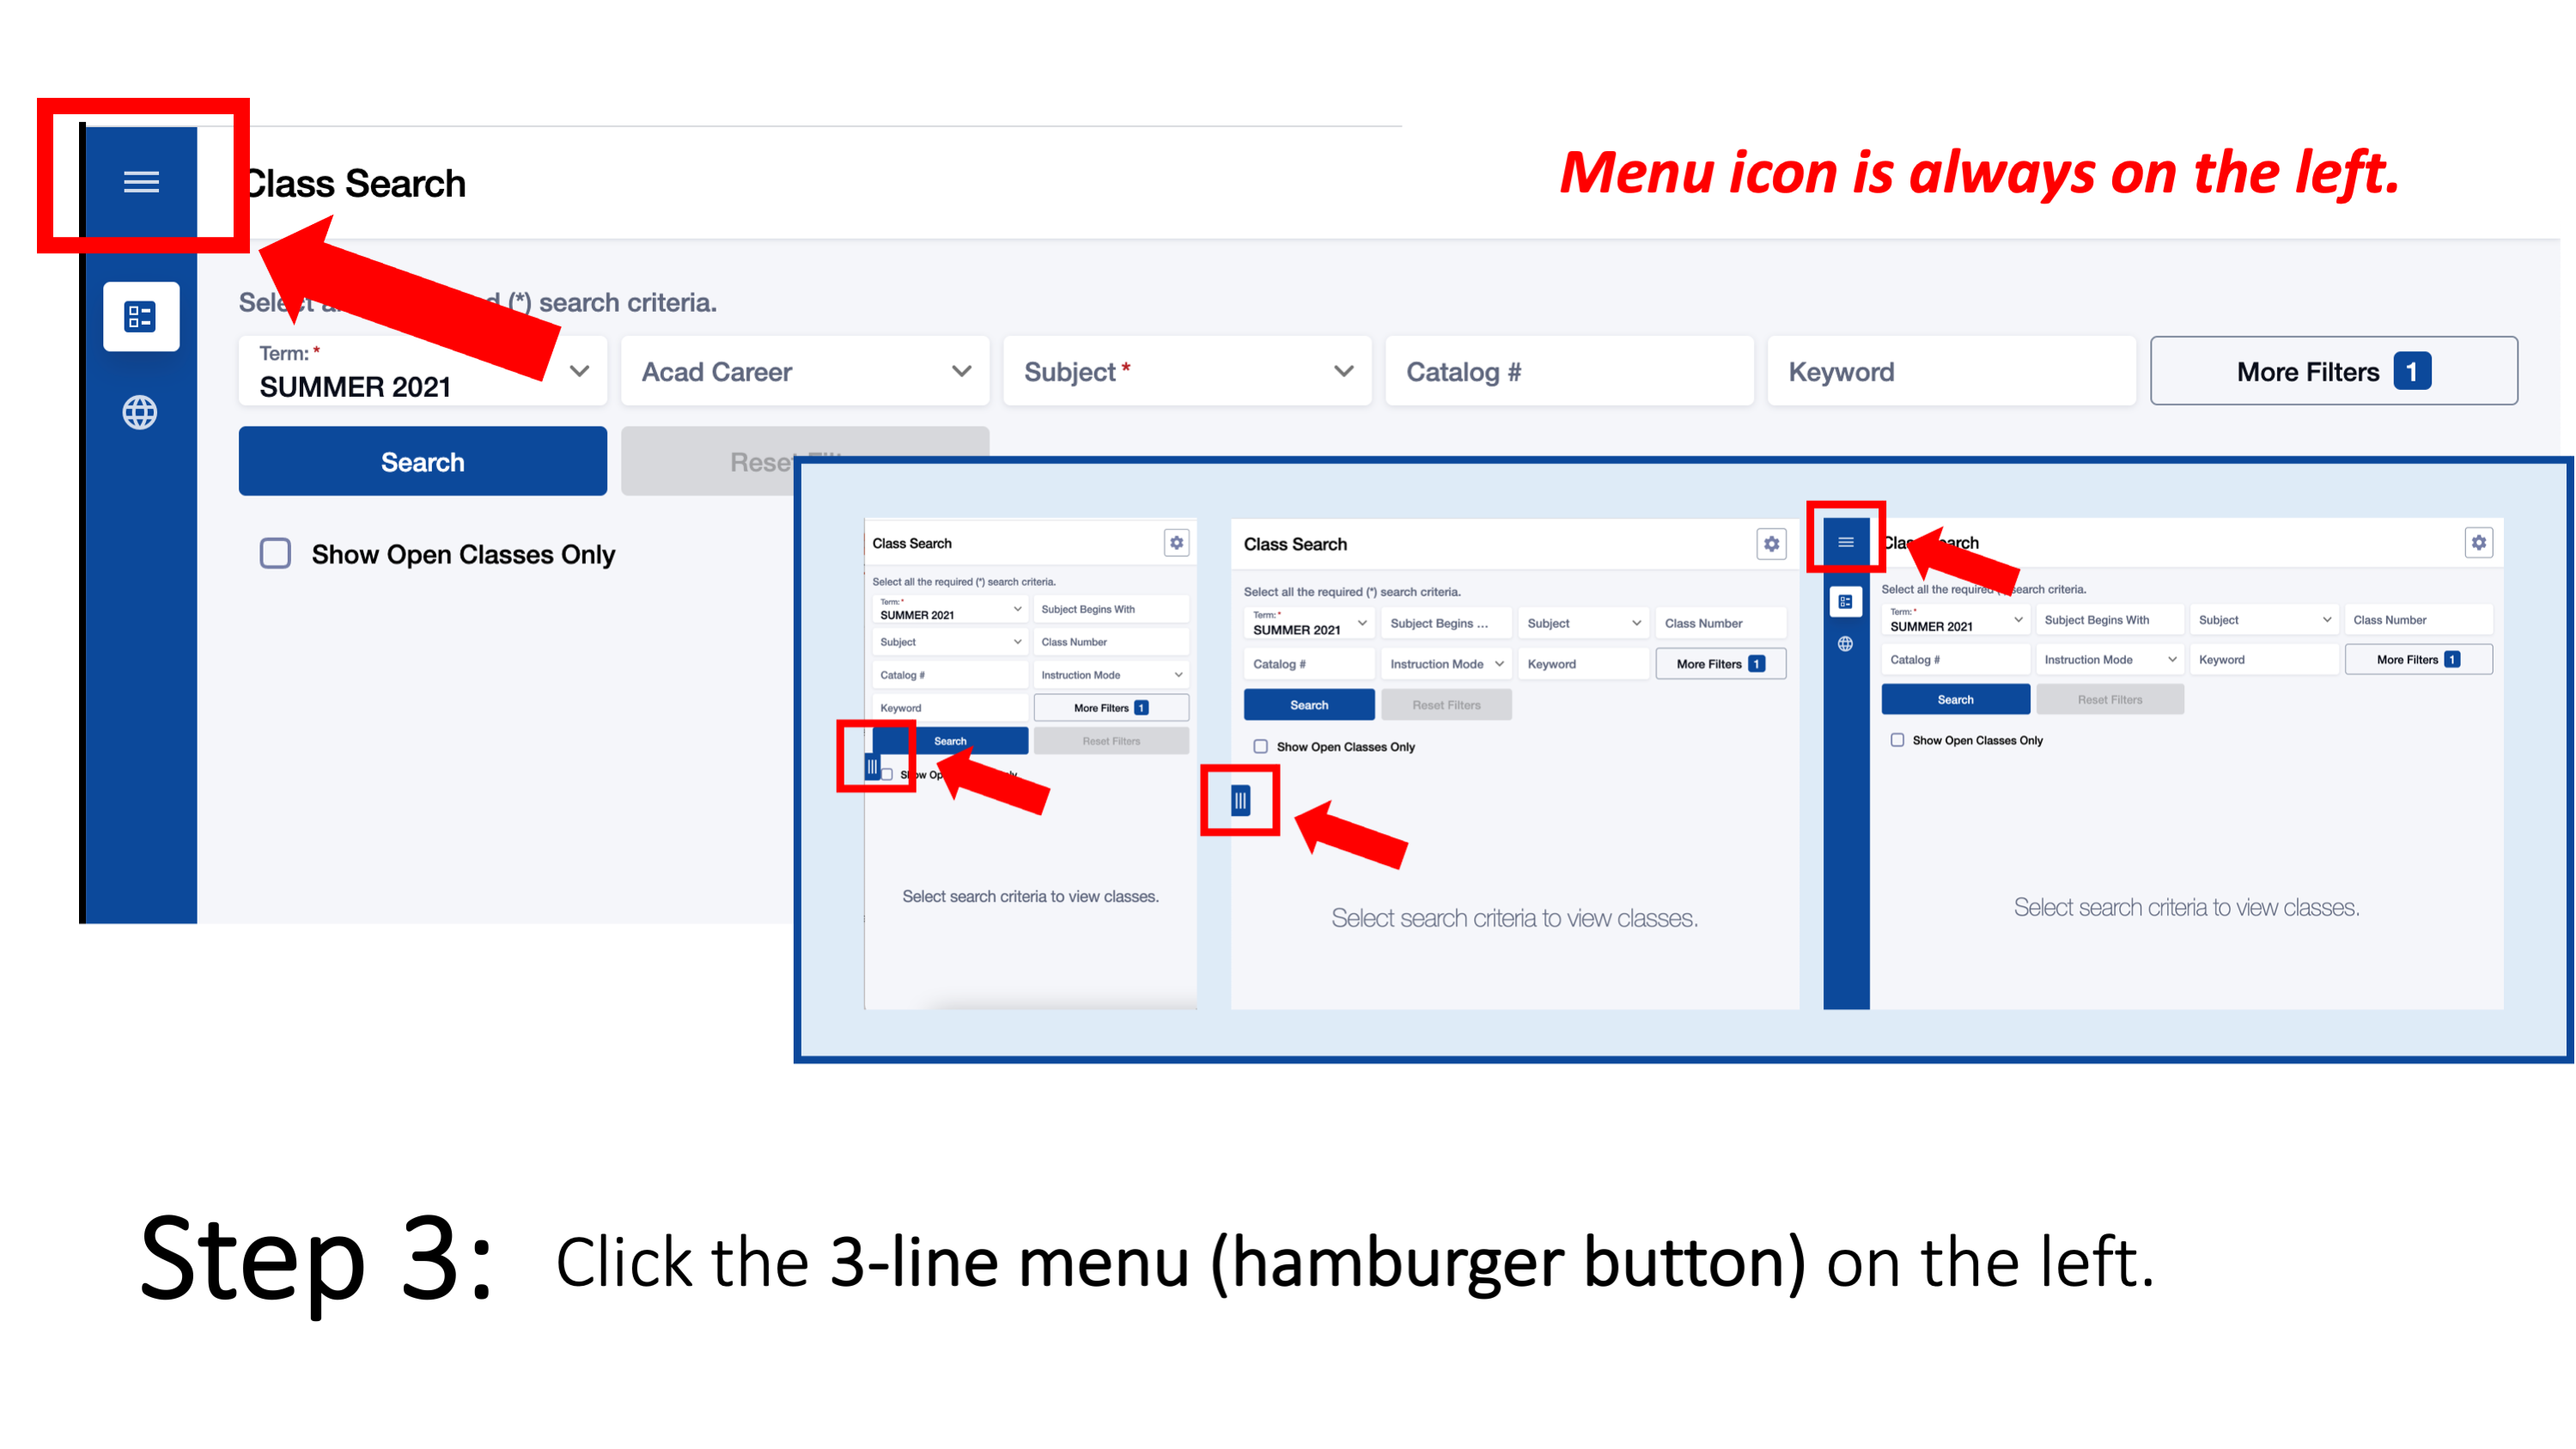 Step 3: Click the 3-line menu (hamburger button) on the left. Menu icon is always on the left.